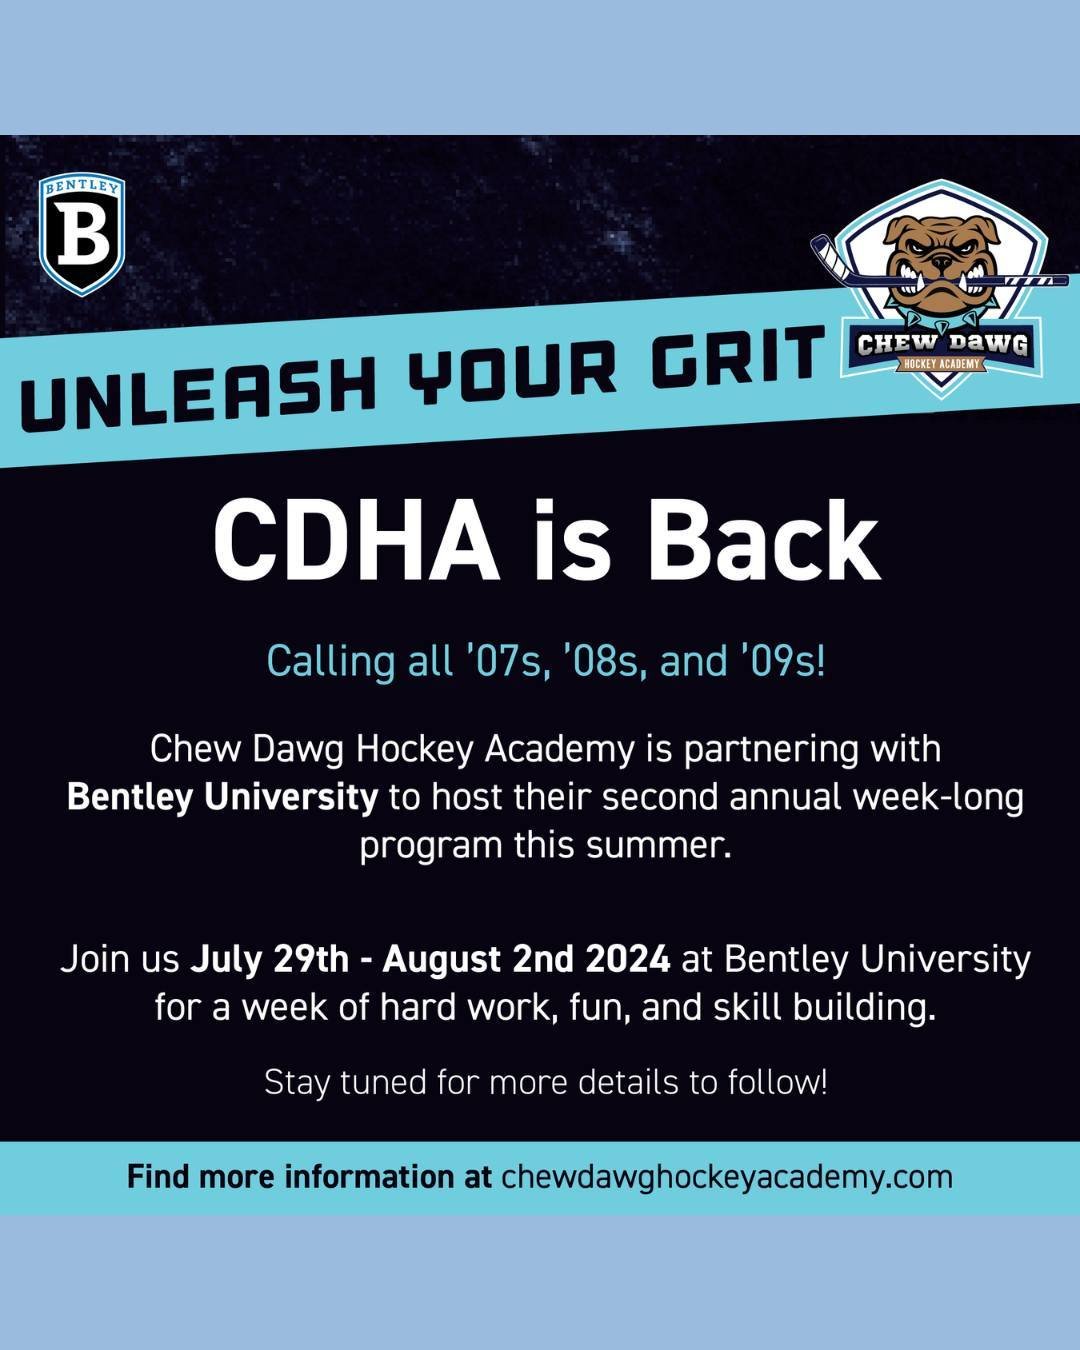 #AMPclient @ChewDawgHockeyAcademy is back!🏒
ㅤ
They are calling all '07, '08 and '09 hockey players for a great week of skill-building, teamwork, and fun @bentleyuniversity
ㅤ
Don't miss out! 🥅🥳
ㅤ
Want to learn more follow @chewdawghockeyacademy